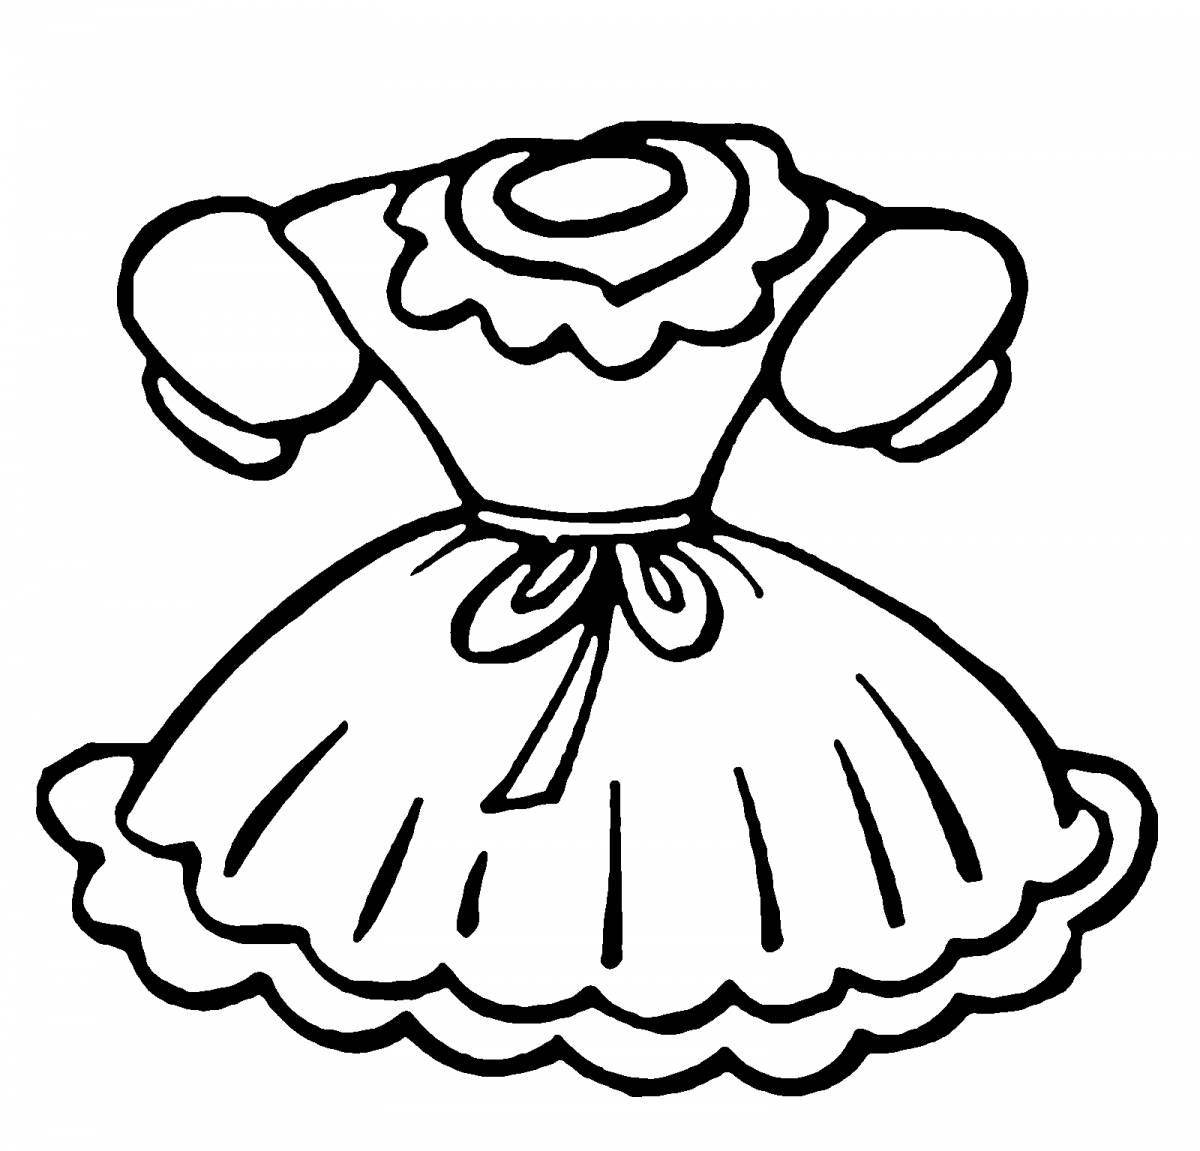 Coloring page stylish dress for children 3-4 years old